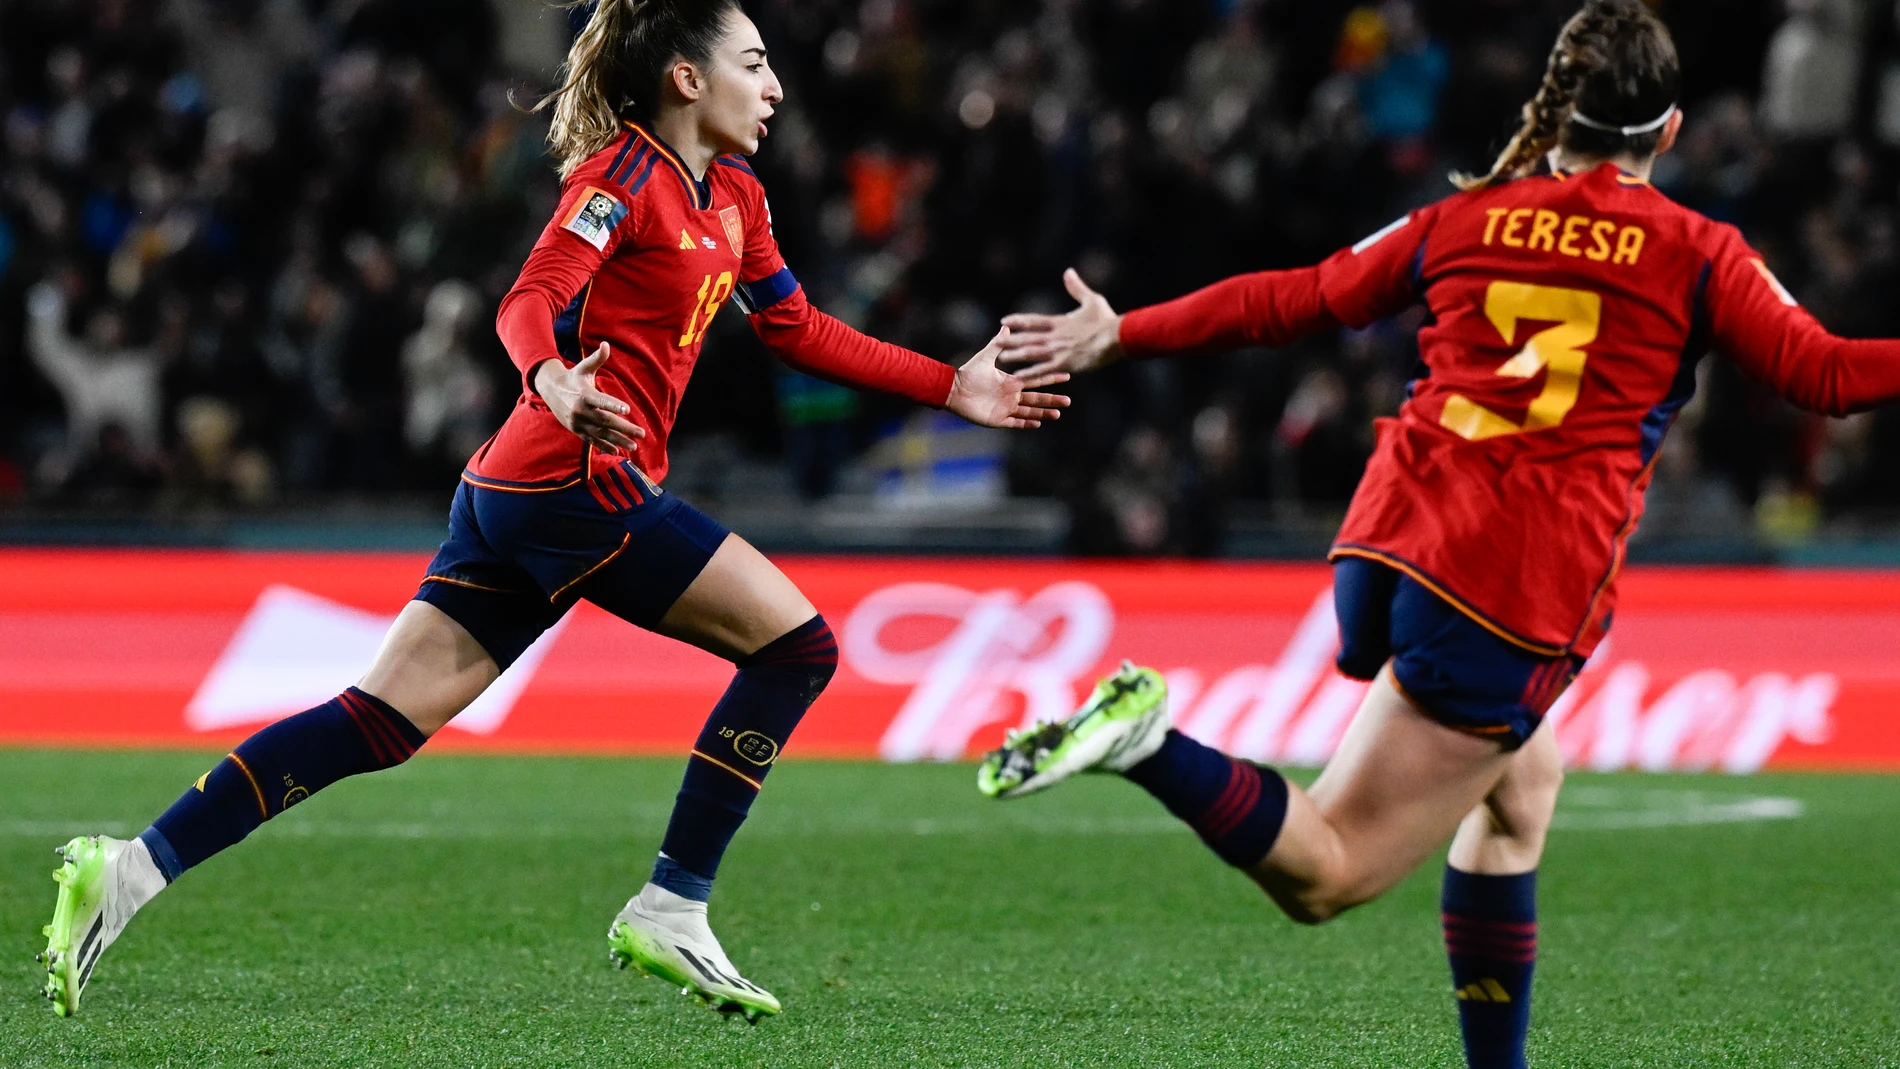 Spain's Olga Carmona, left, reacts after scoring her team's second goal during the Women's World Cup semifinal soccer match between Sweden and Spain at Eden Park in Auckland, New Zealand, Tuesday, Aug. 15, 2023. (AP Photo/Andrew Cornaga)